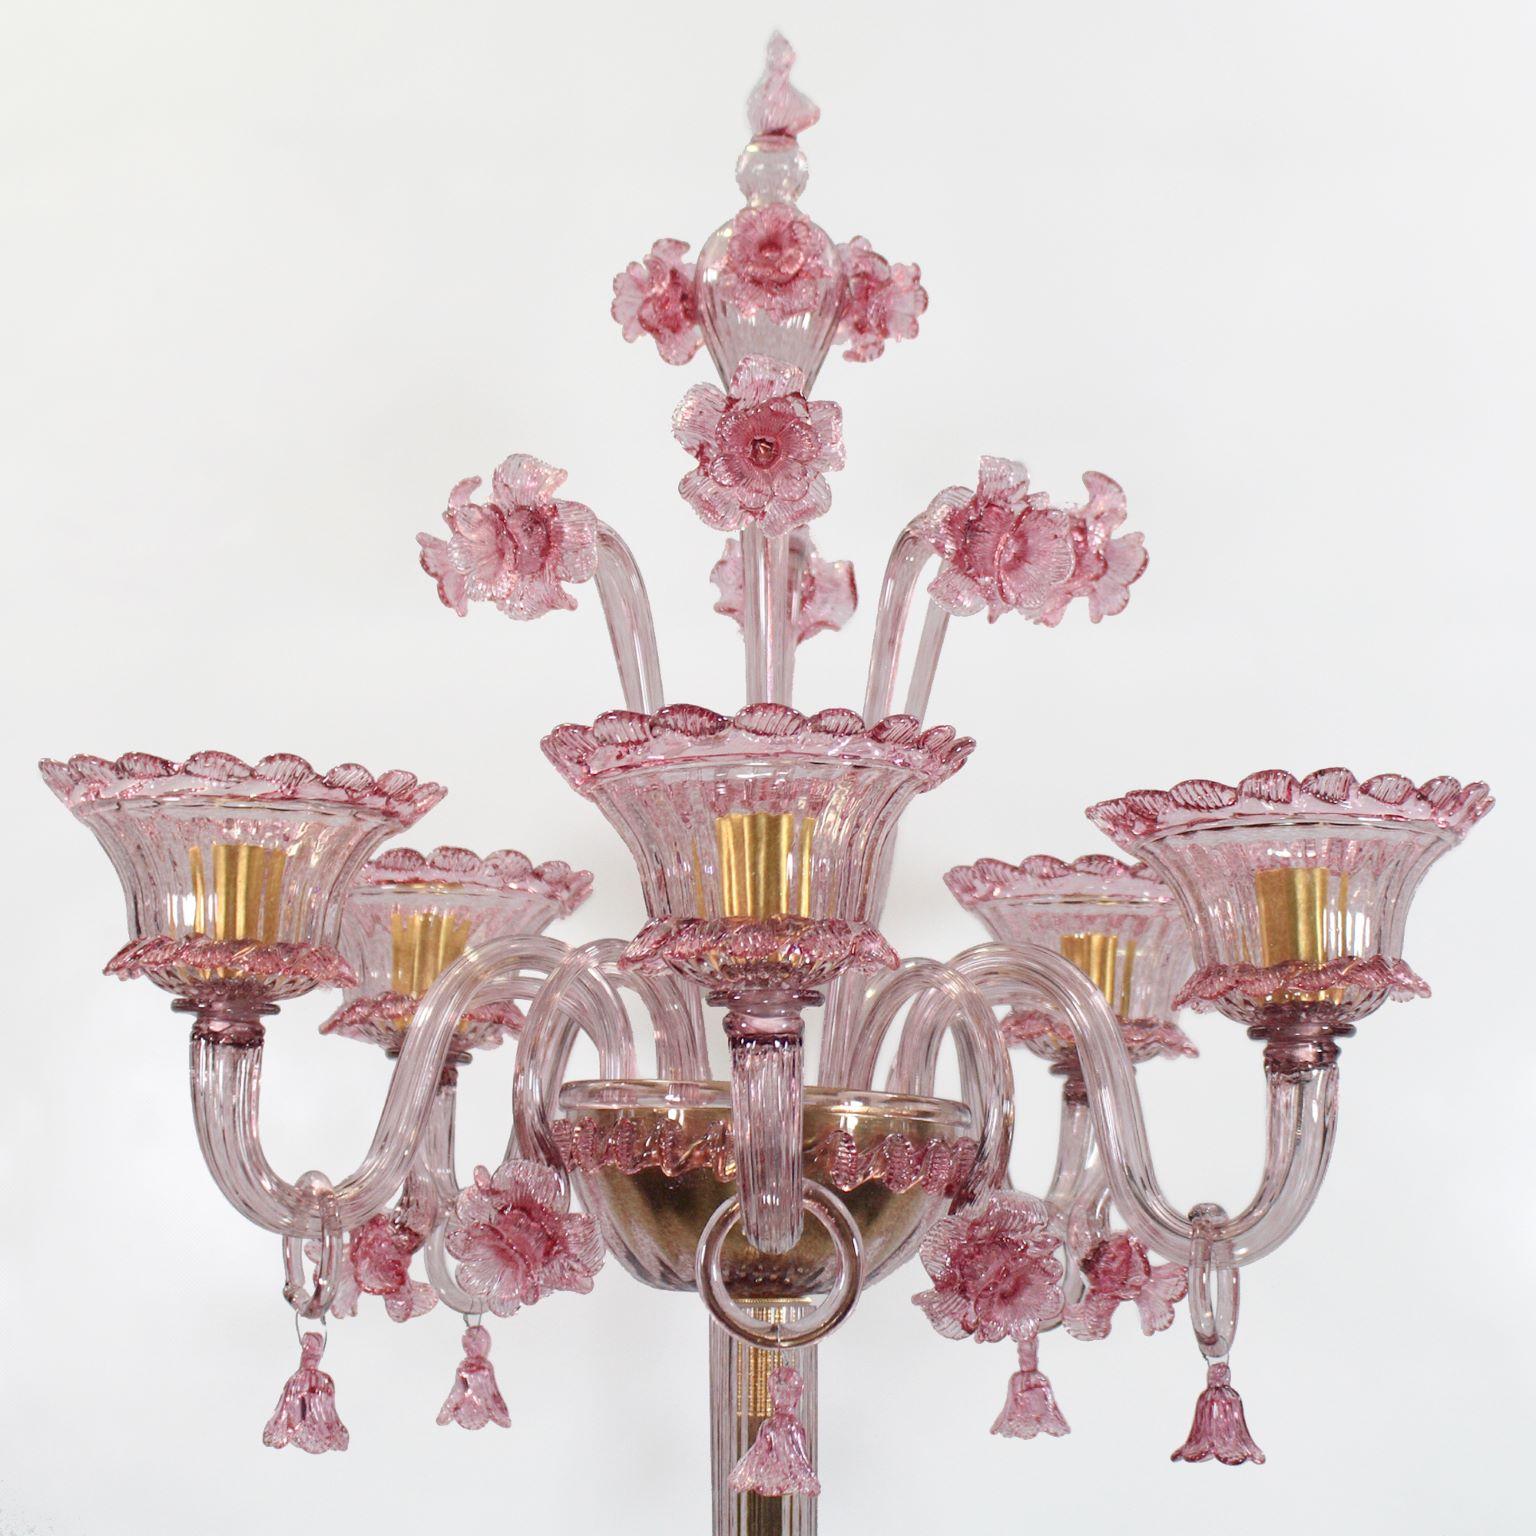 Artistic floor lamp, 5 lights, in amethyst blown Murano glass, with pink ornamental elements and flowers by Multiforme. The glass cups are upwards.
Inspired by the Classic Venetian tradition it is characterised by a central column where many blown